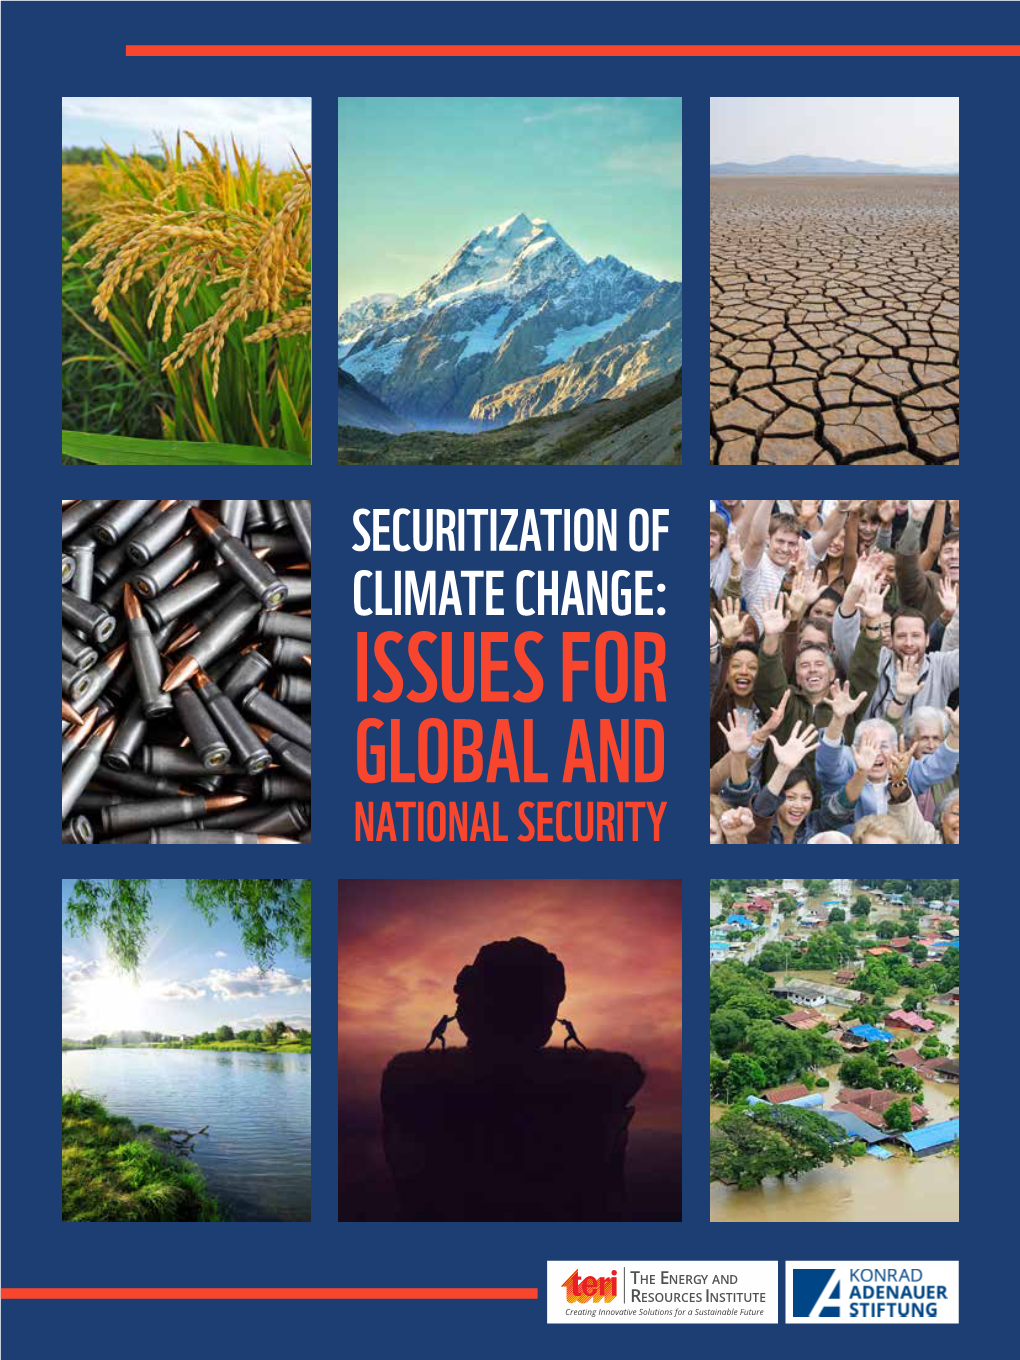 TERI-KAS Climate Change and Security Conference Download